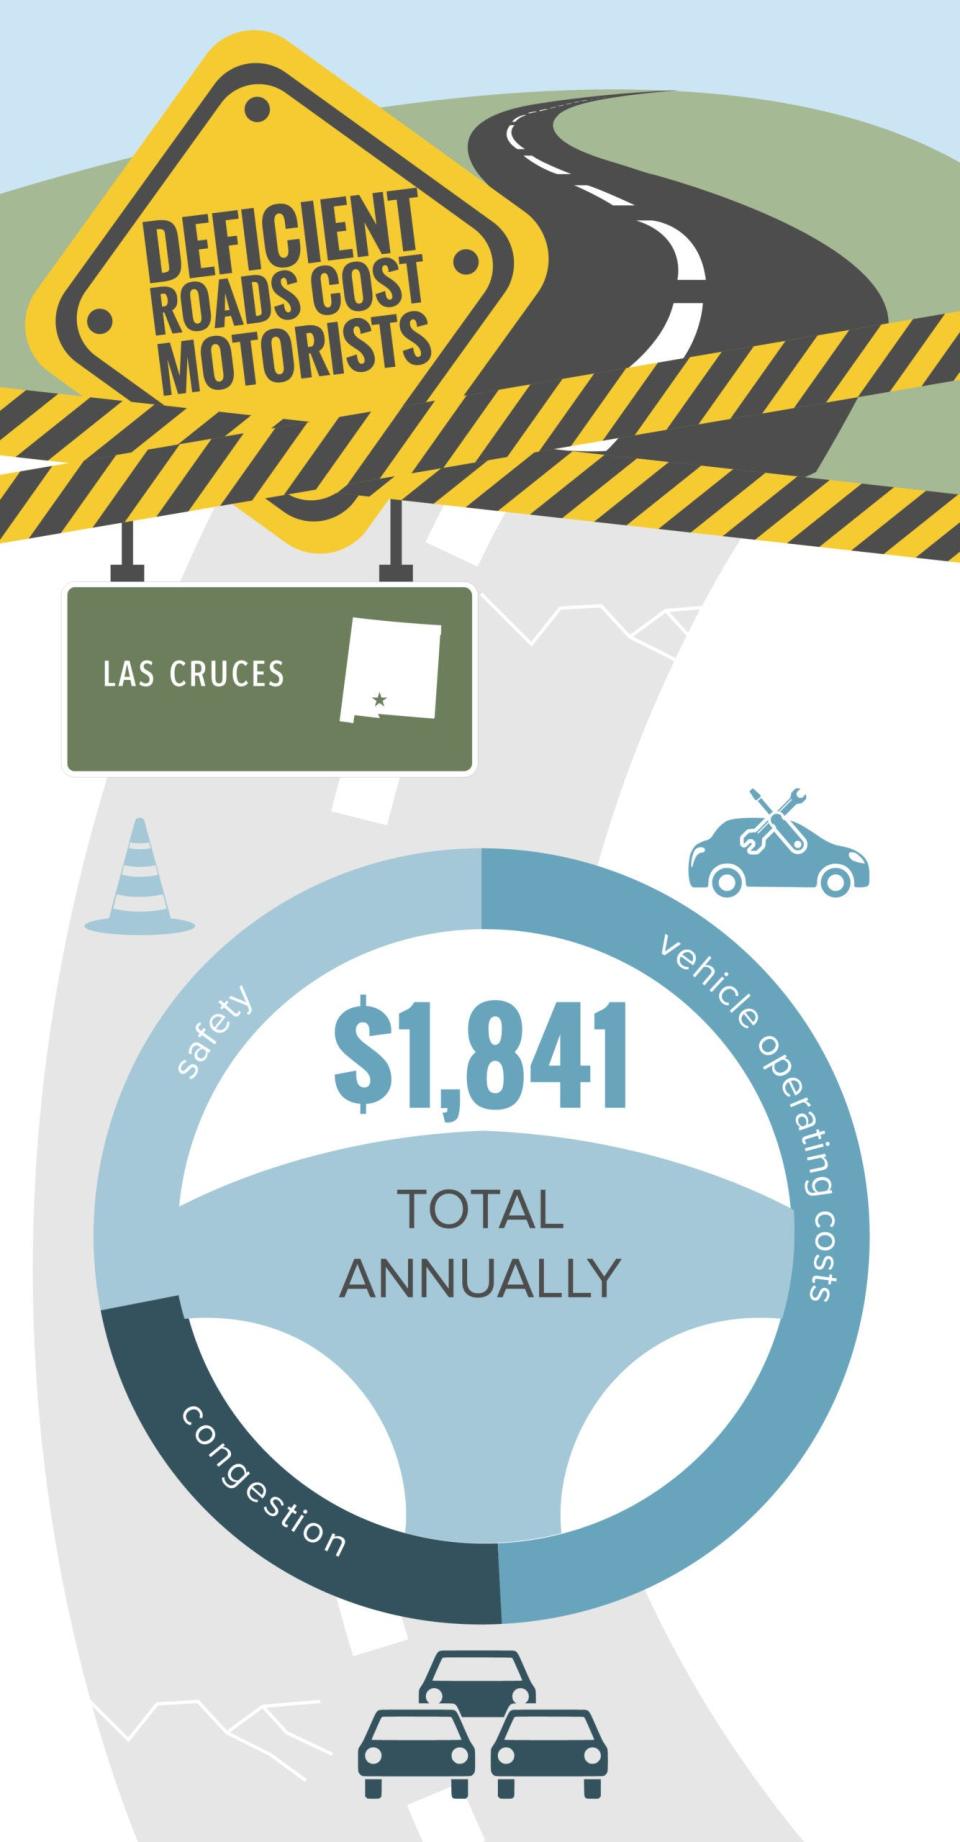 According to a report released Tuesday, Jan. 25, 2022, deficient roads cost Las Cruces-area drivers $1,841 each year.